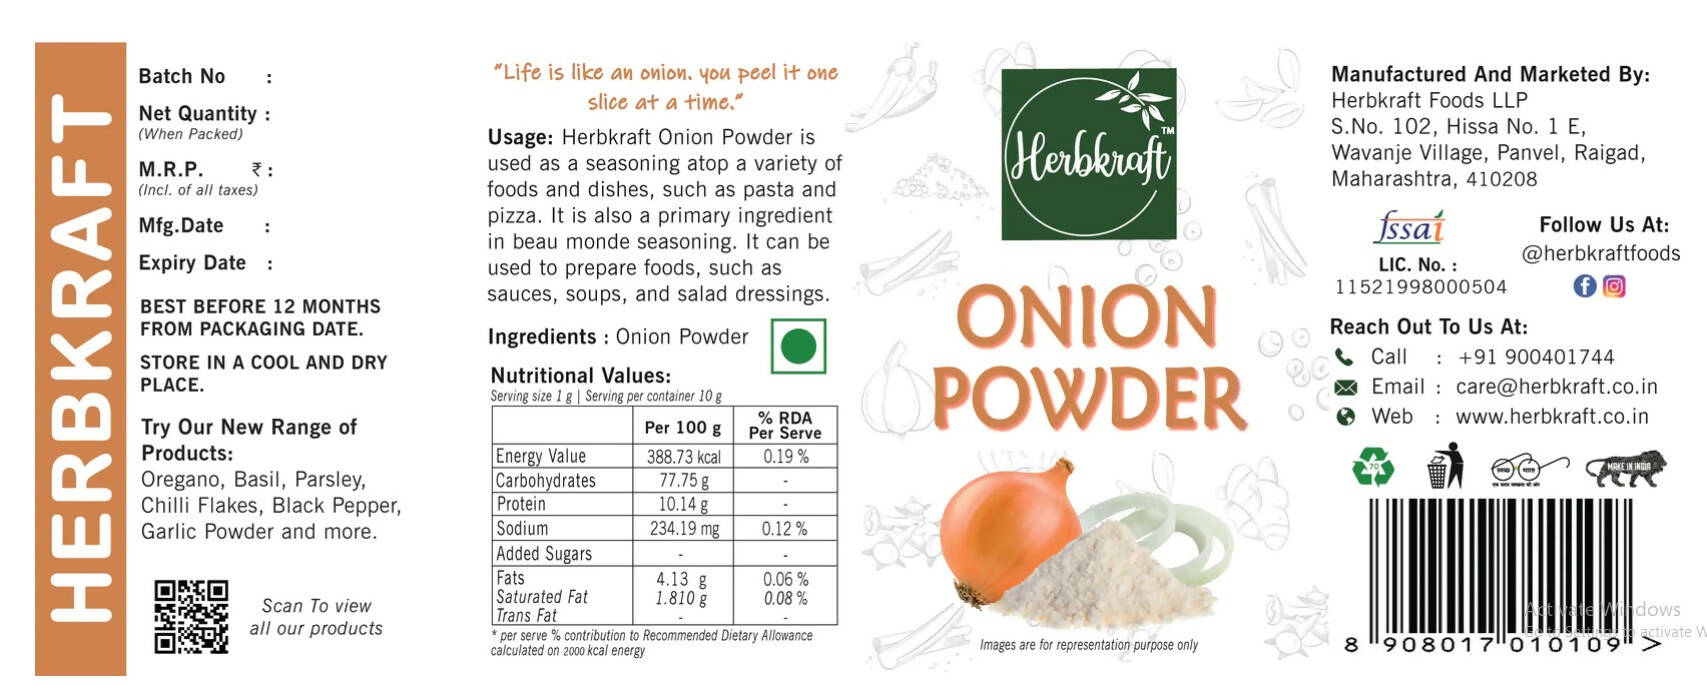 Herbkraft - Onion Powder 50 GM Pack of 1 | Fresh and Natural Herbs and Seasonings | Dry Leaves | Grocery - Masala - Spices | Sauces - Soups - Salad Dressings | No Added Colour and Flavour